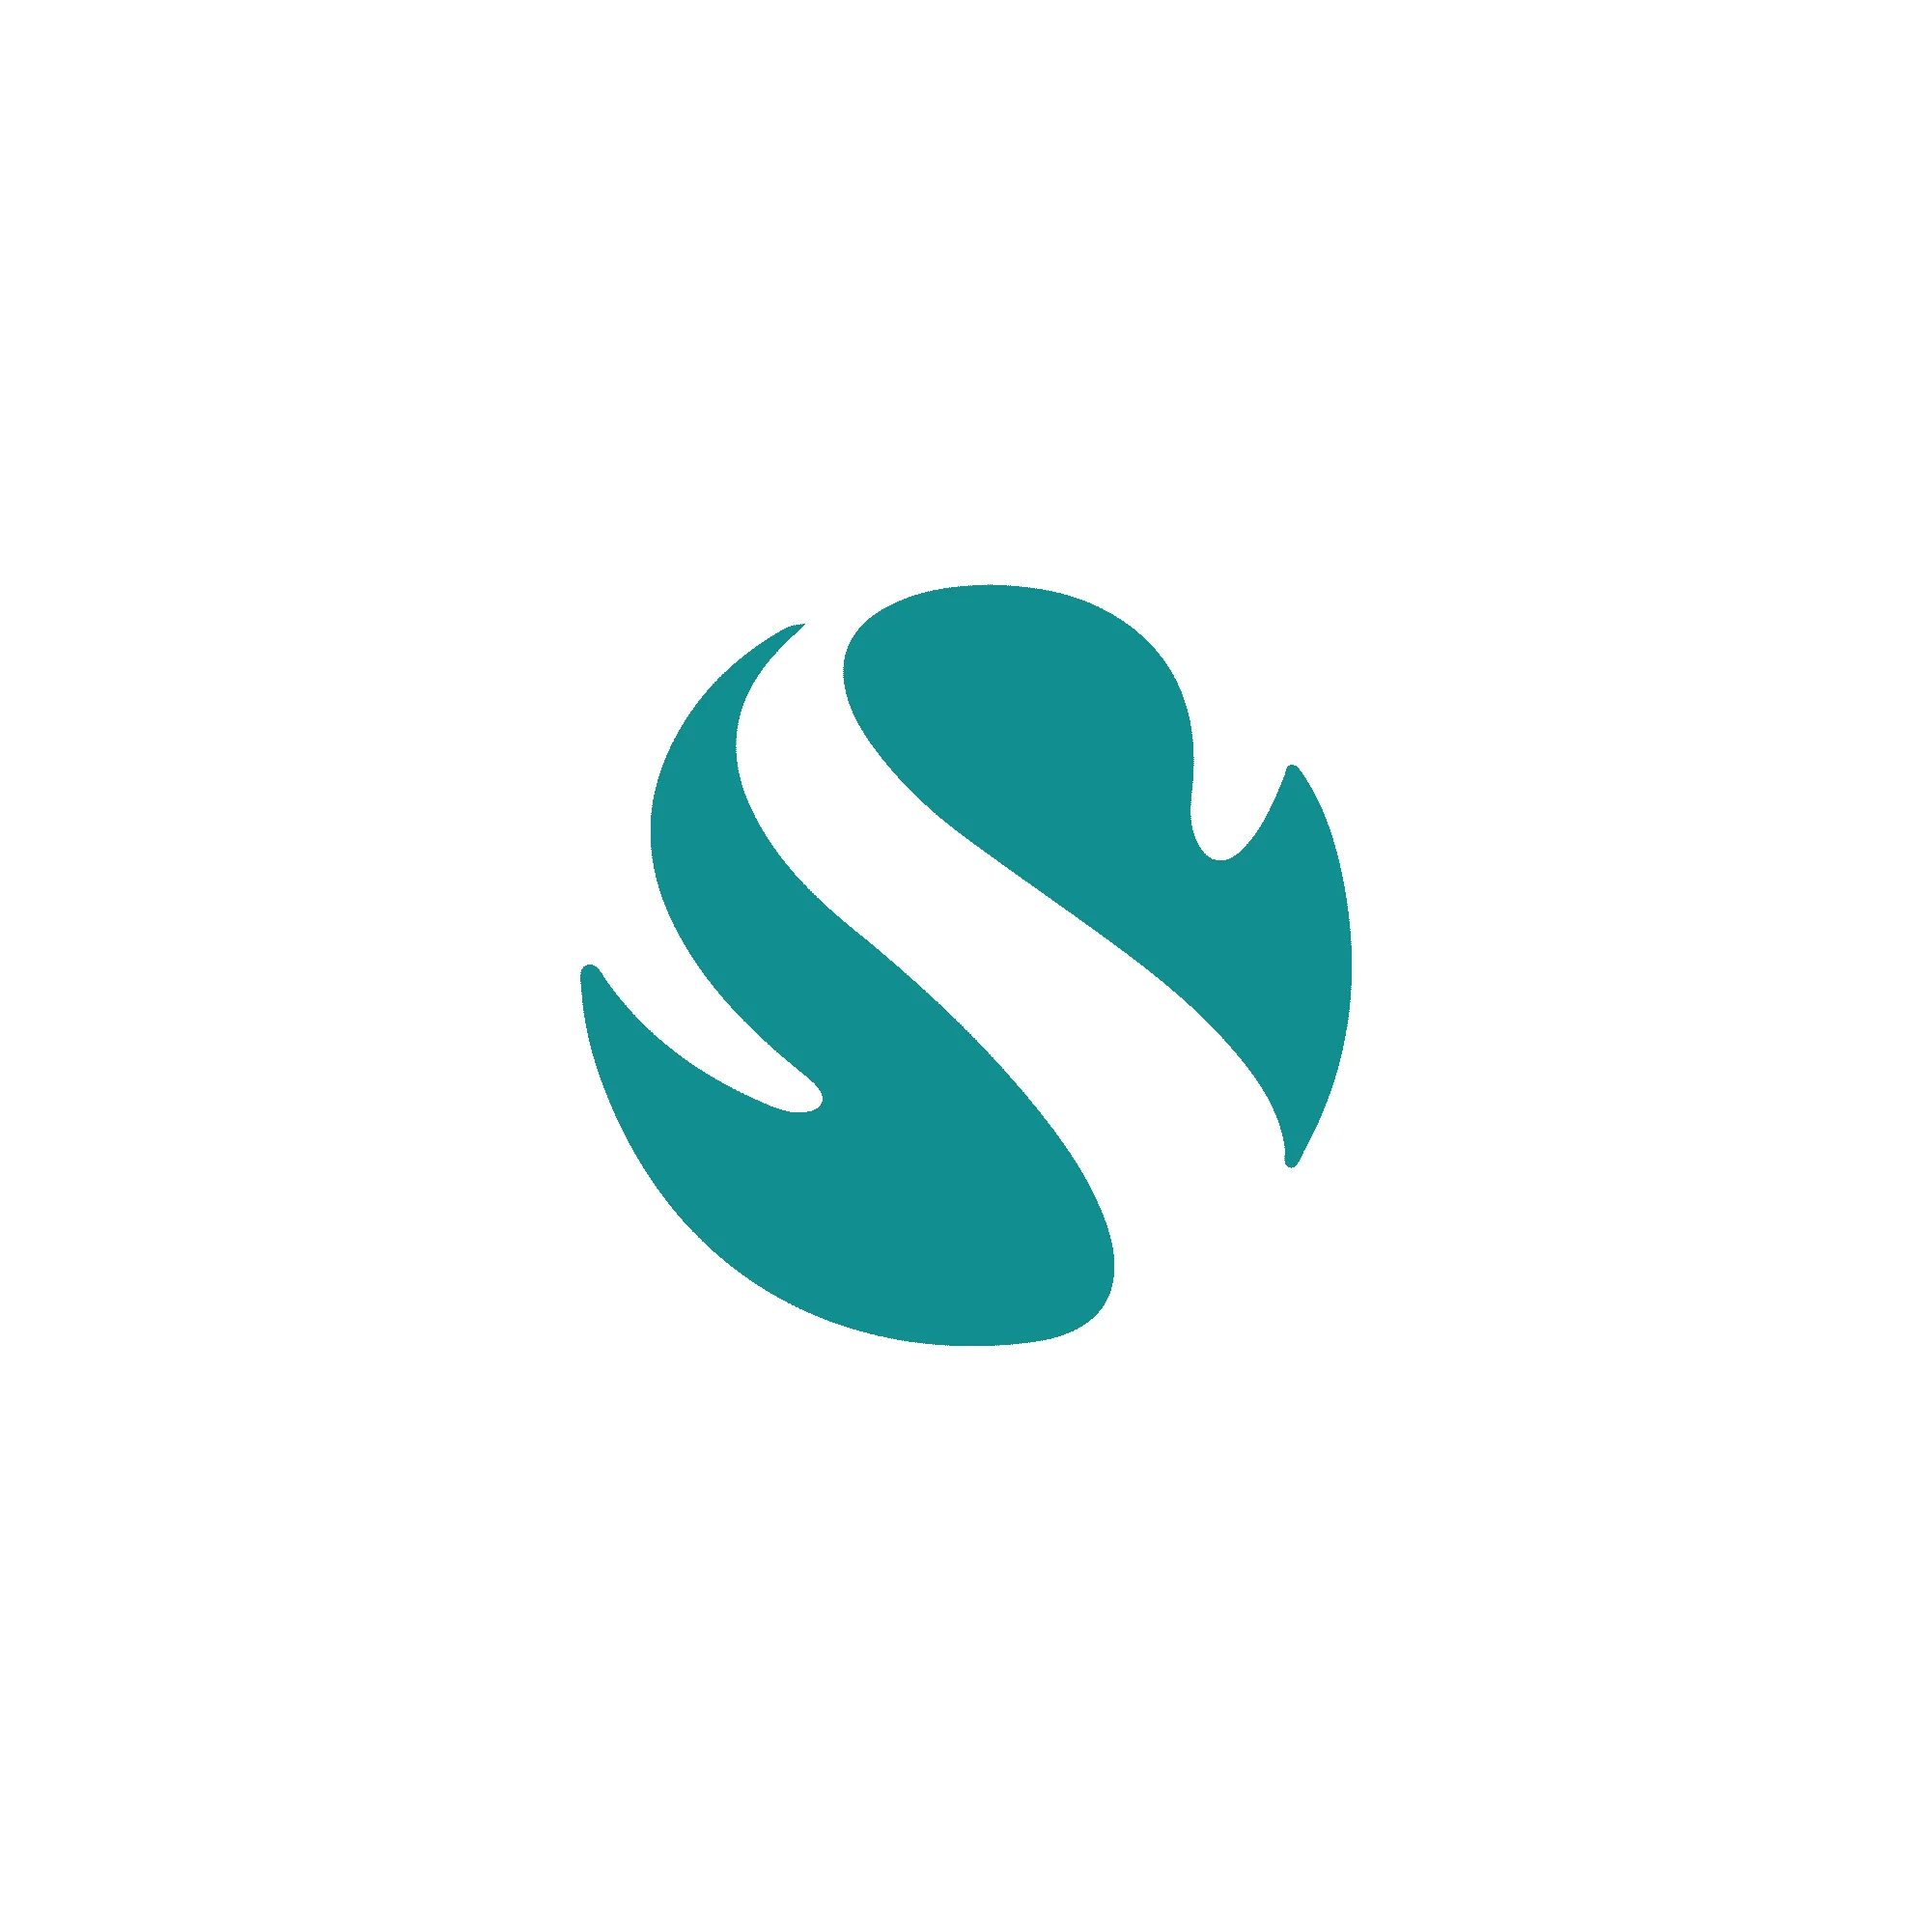 Branding logo seign letter S, in a swan round shape, turquoise